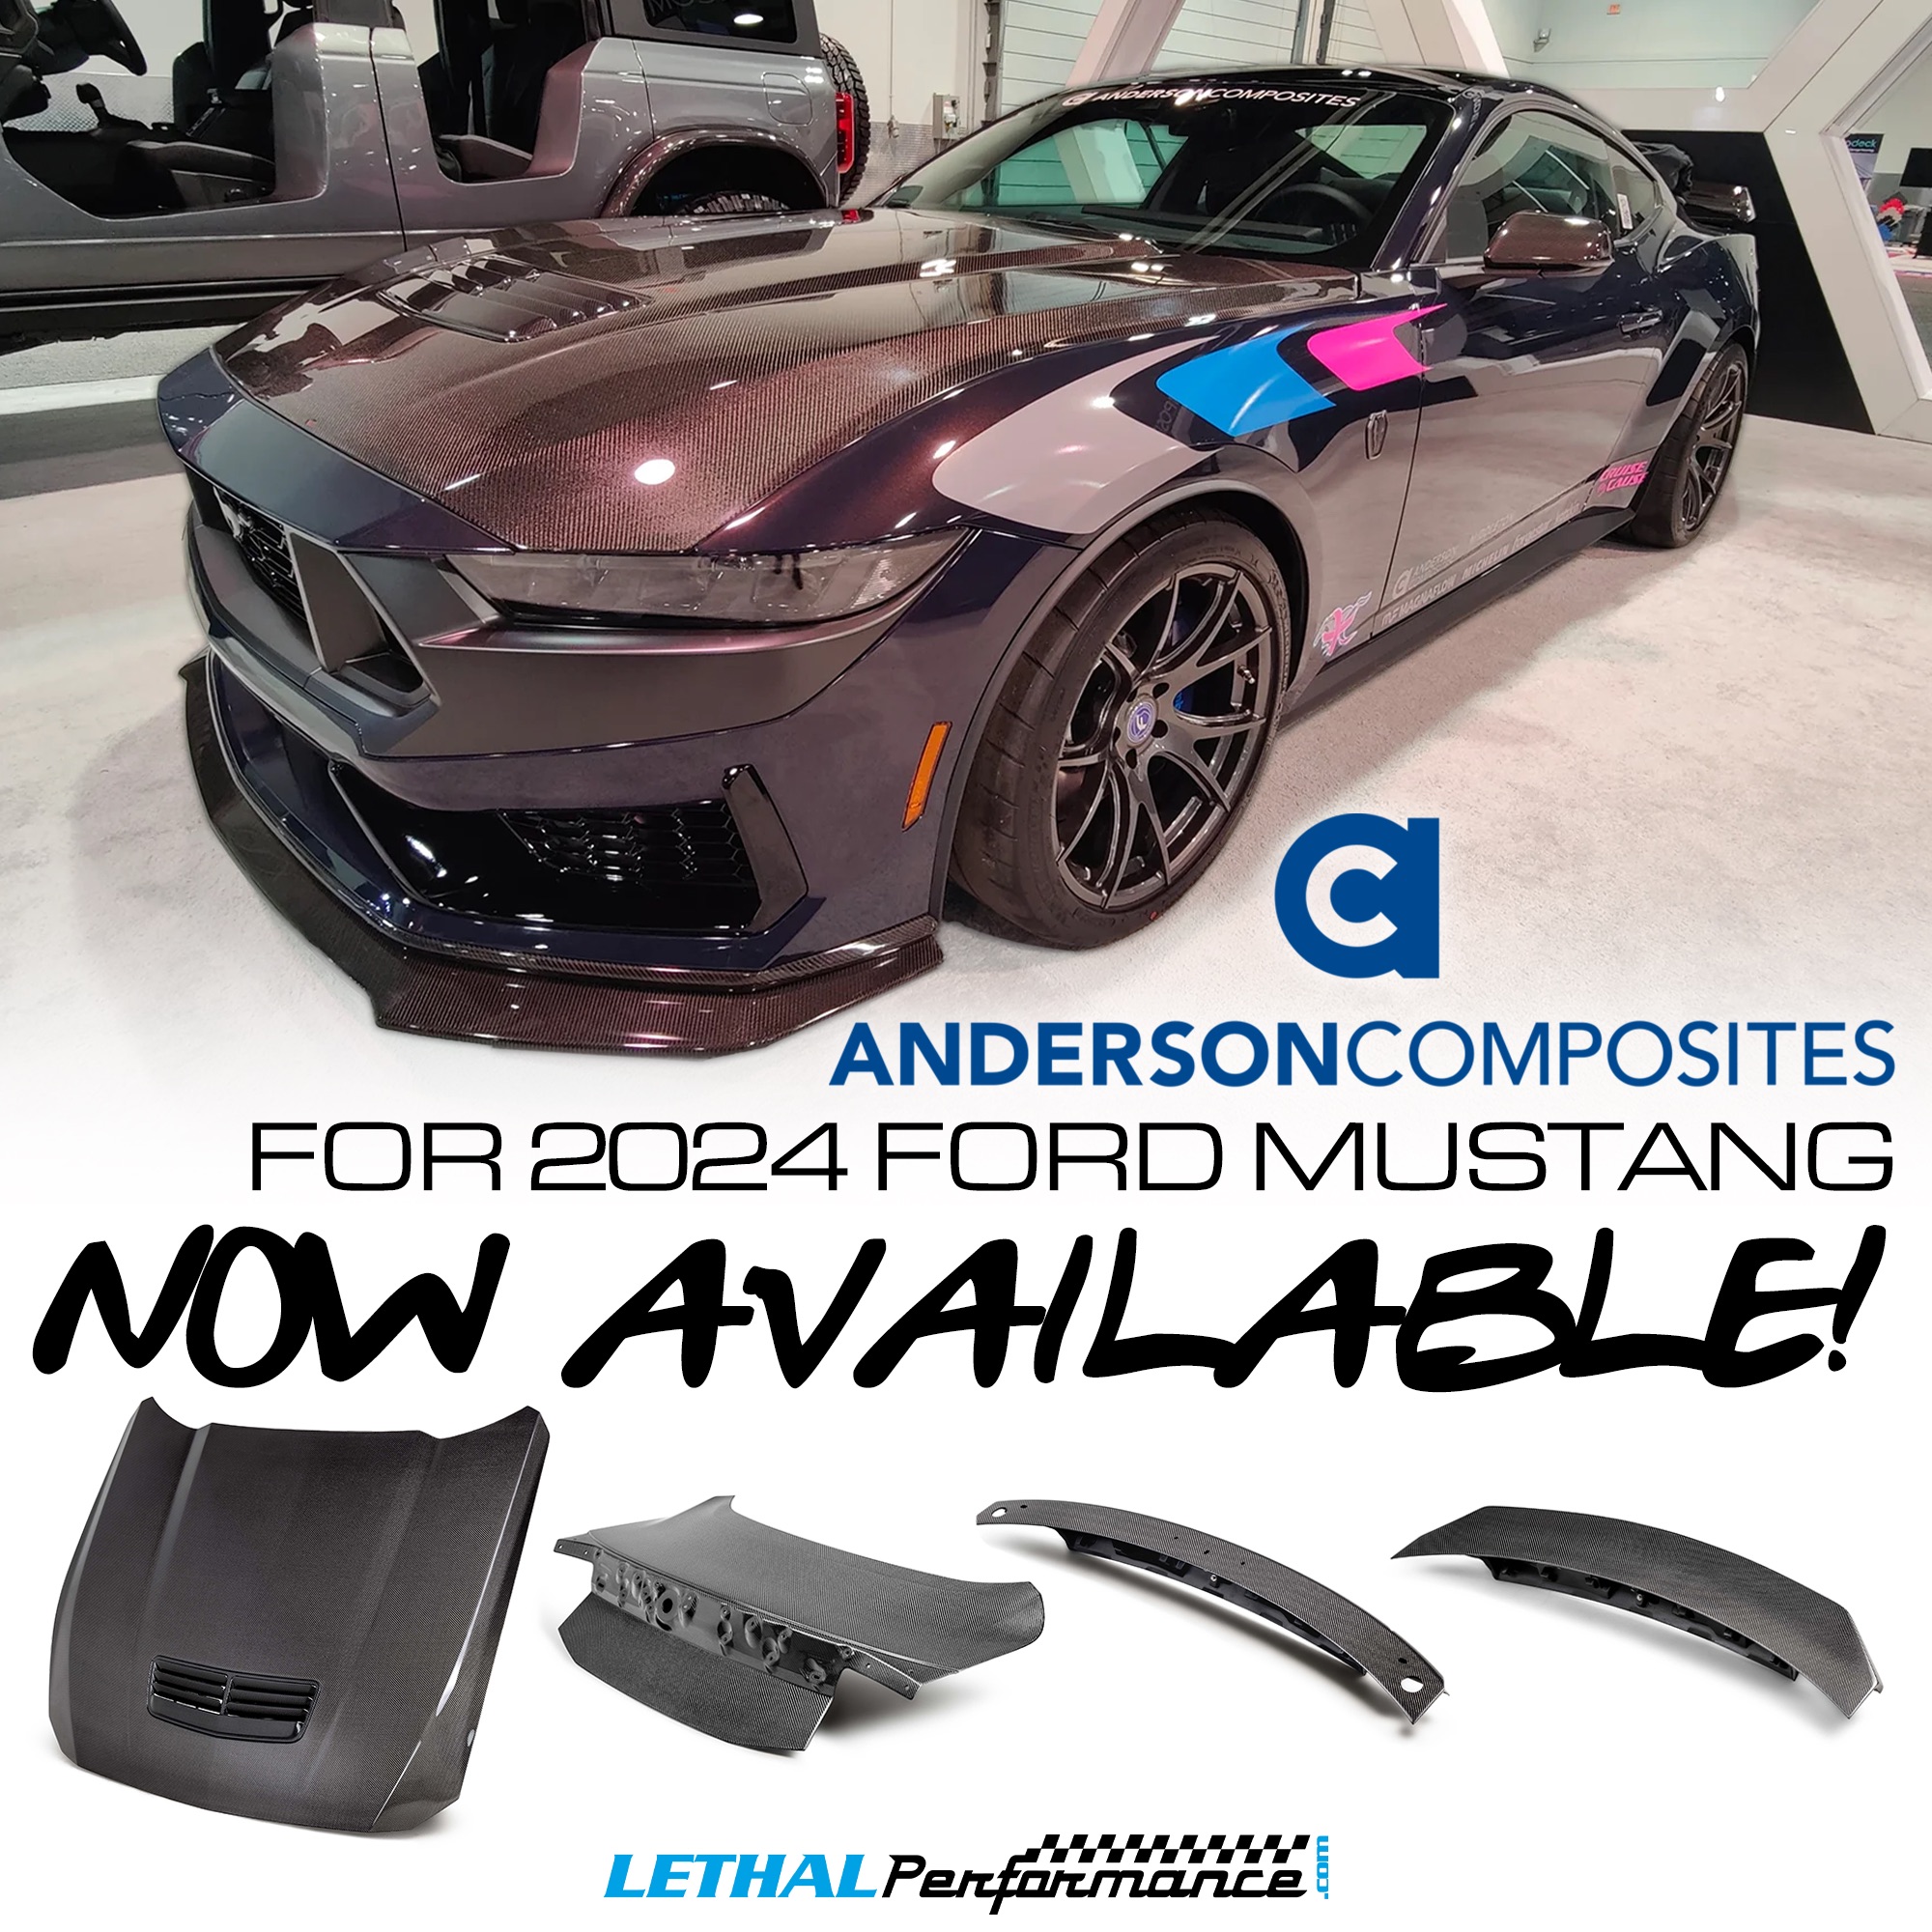 S650 Mustang Anderson Composites CARBON FIBER for your 2024 Mustang!! anderson comp. 2024